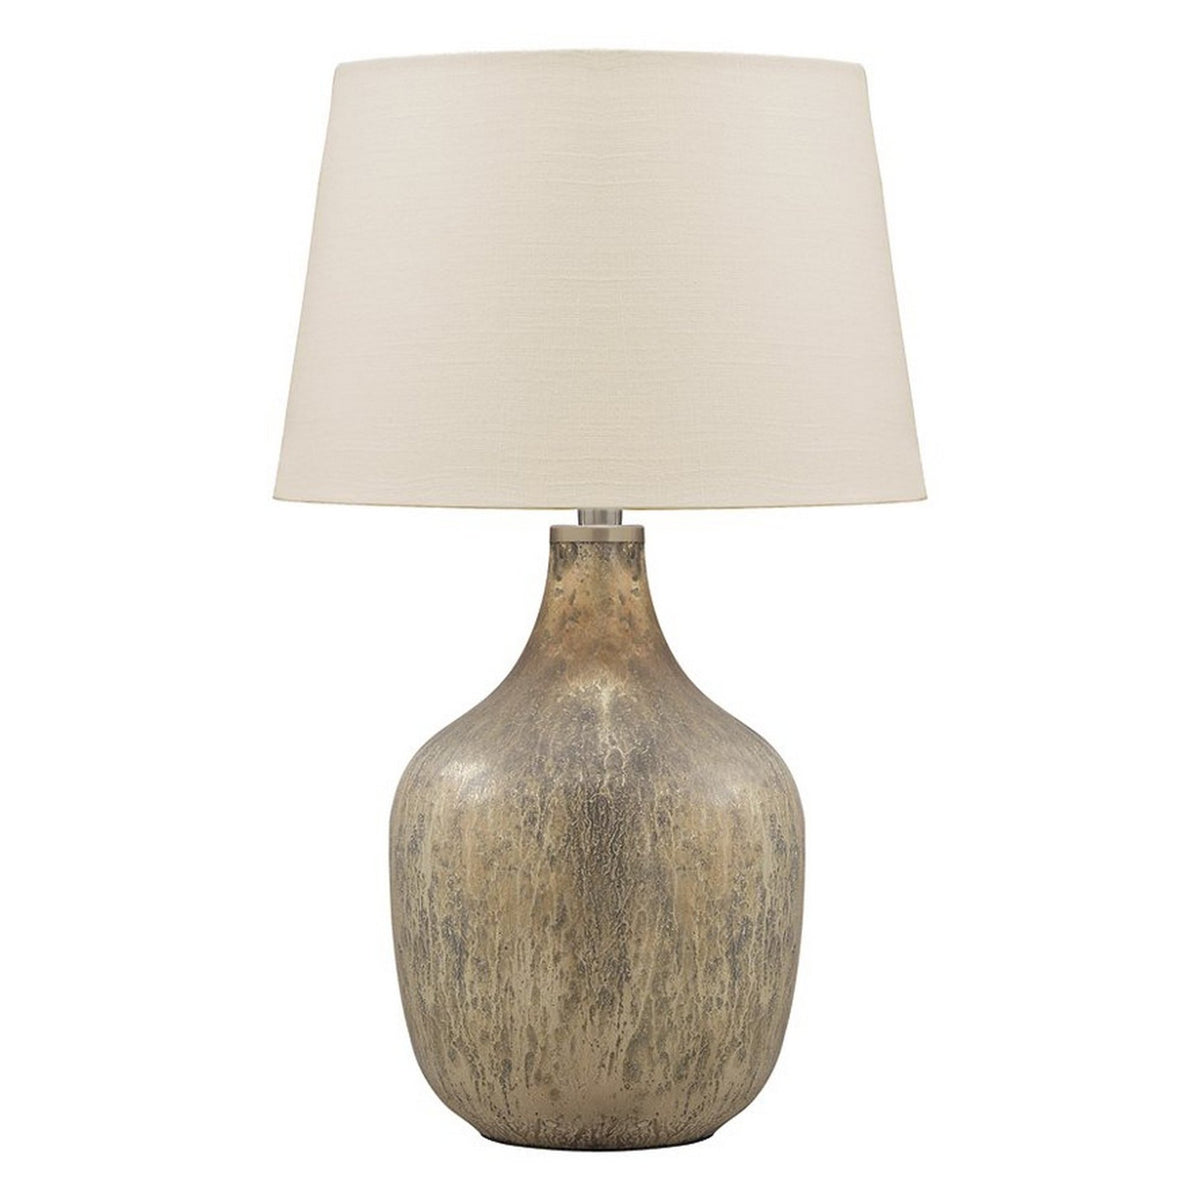 Mercury Glass Table Lamp with Drum Shade, Gold and Beige - BM227212